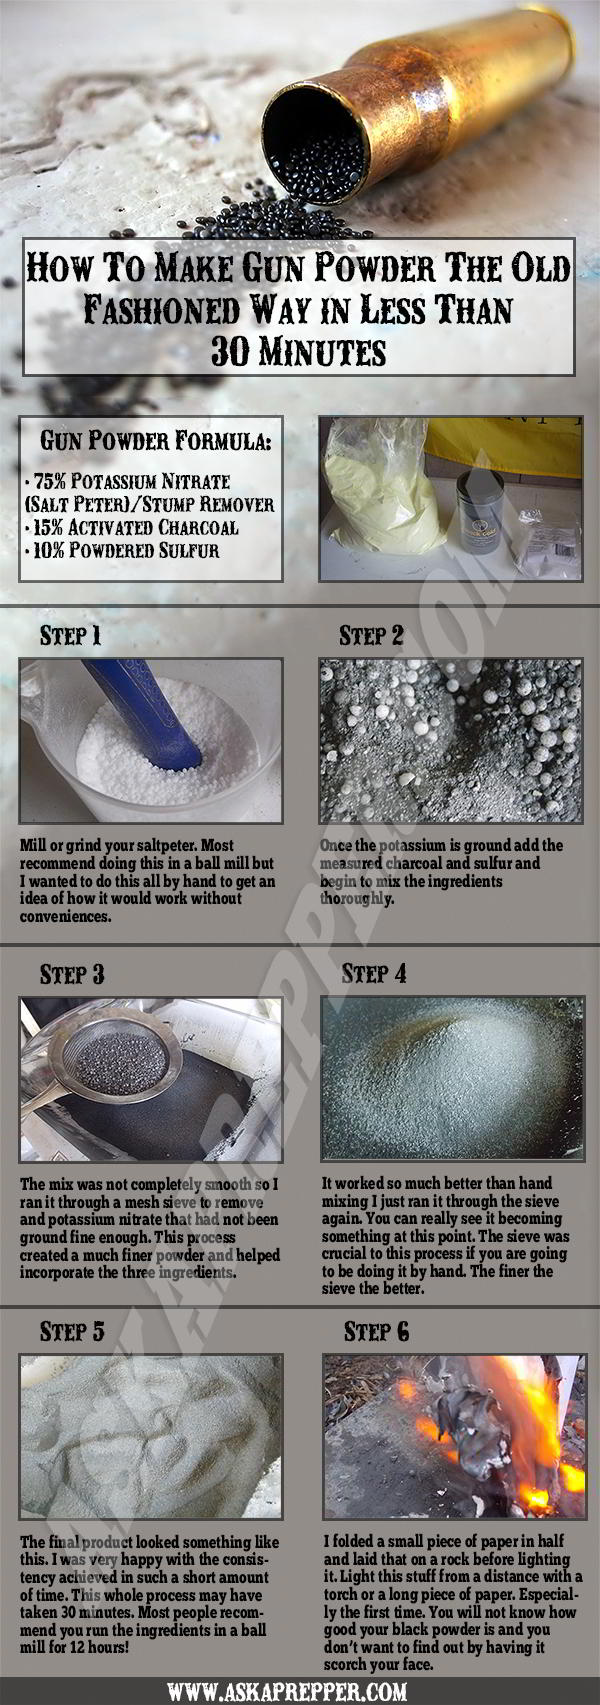 How To Make Gun Powder Step BY Step With Pictures Infografic